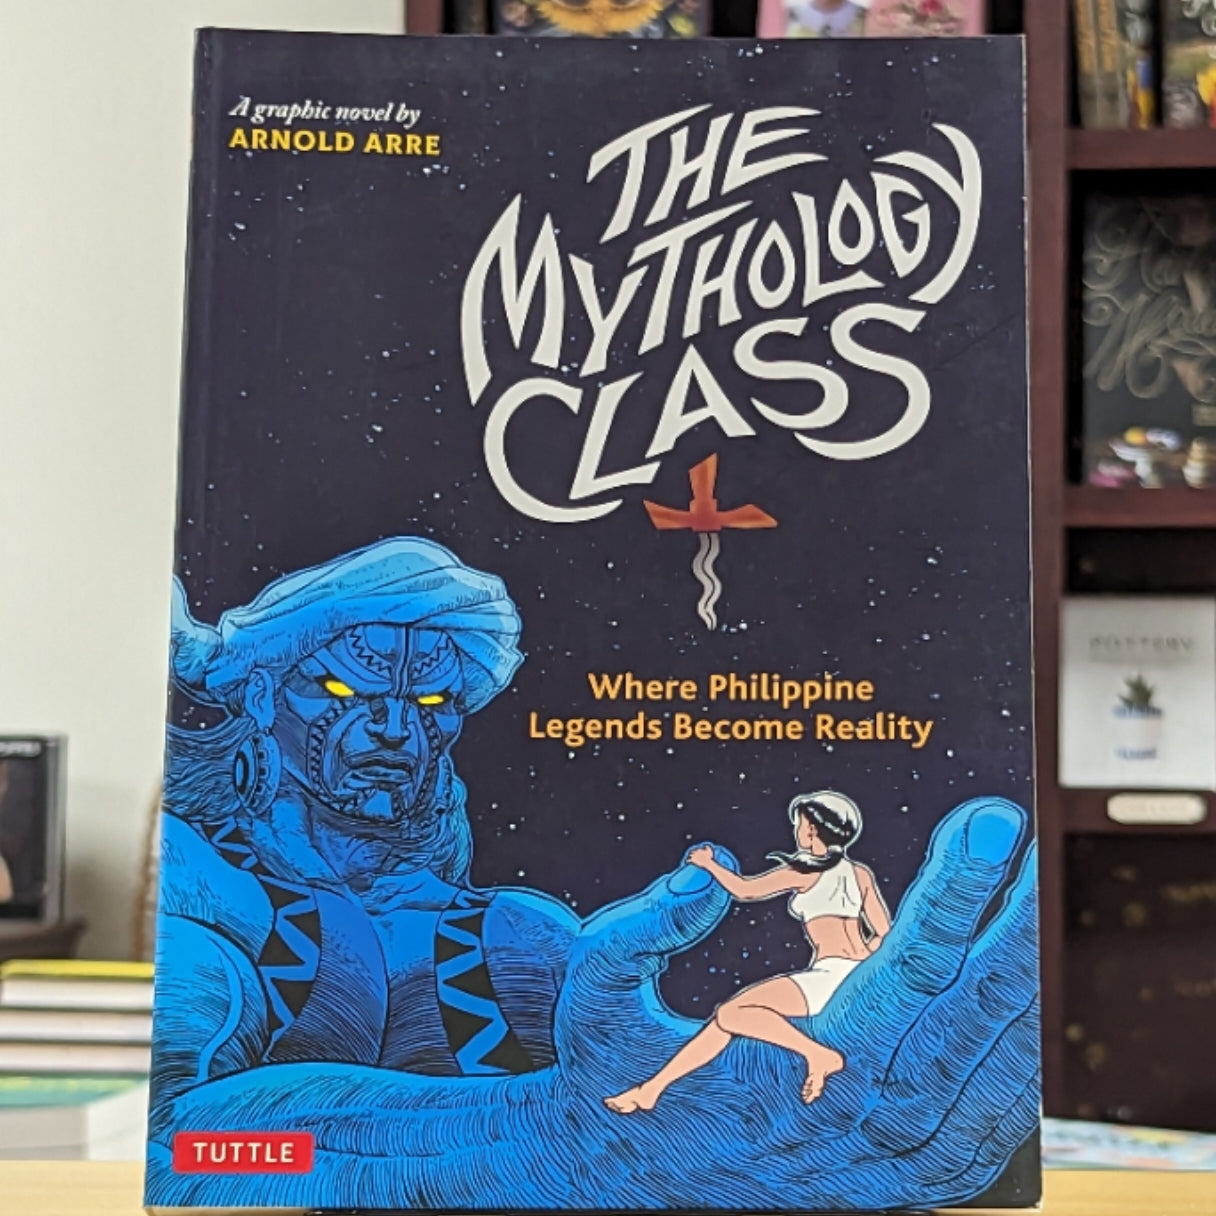 The Mythology Class: Where Philippine Legends Become Reality (A Graphic Novel)